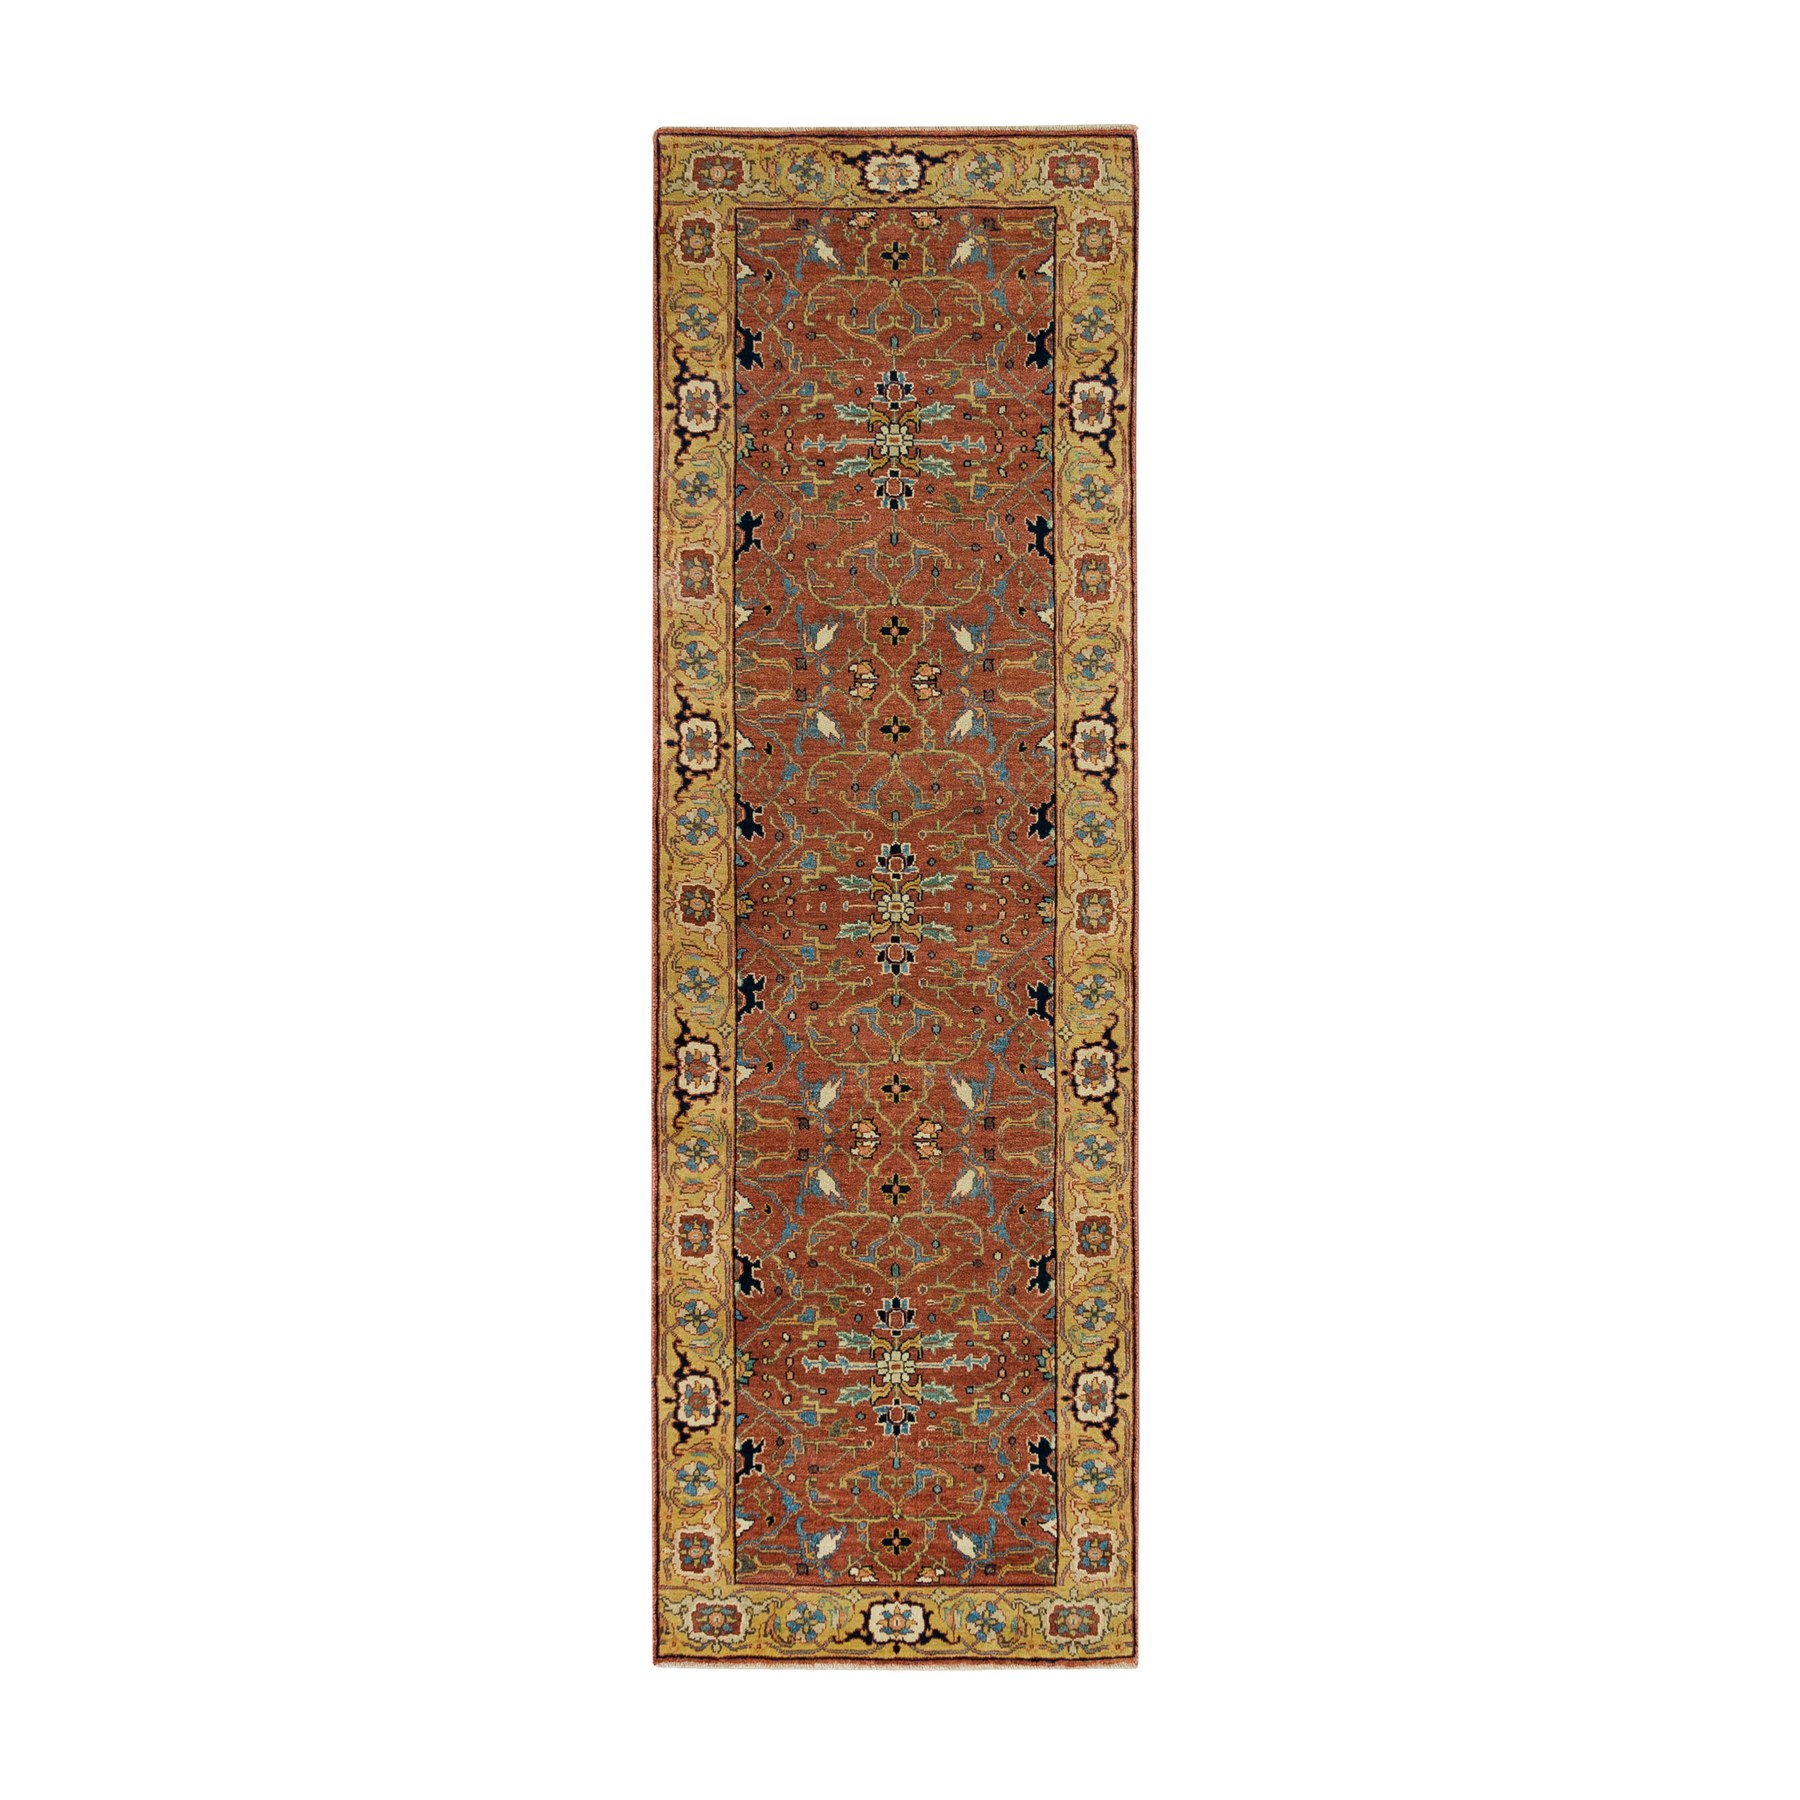 2'7"x8'1" Terracotta Red, Antiqued Fine Heriz Re-Creation, Hand Woven, Vegetable Dyes, Soft and Plush, 100% Wool, Runner Oriental Rug 